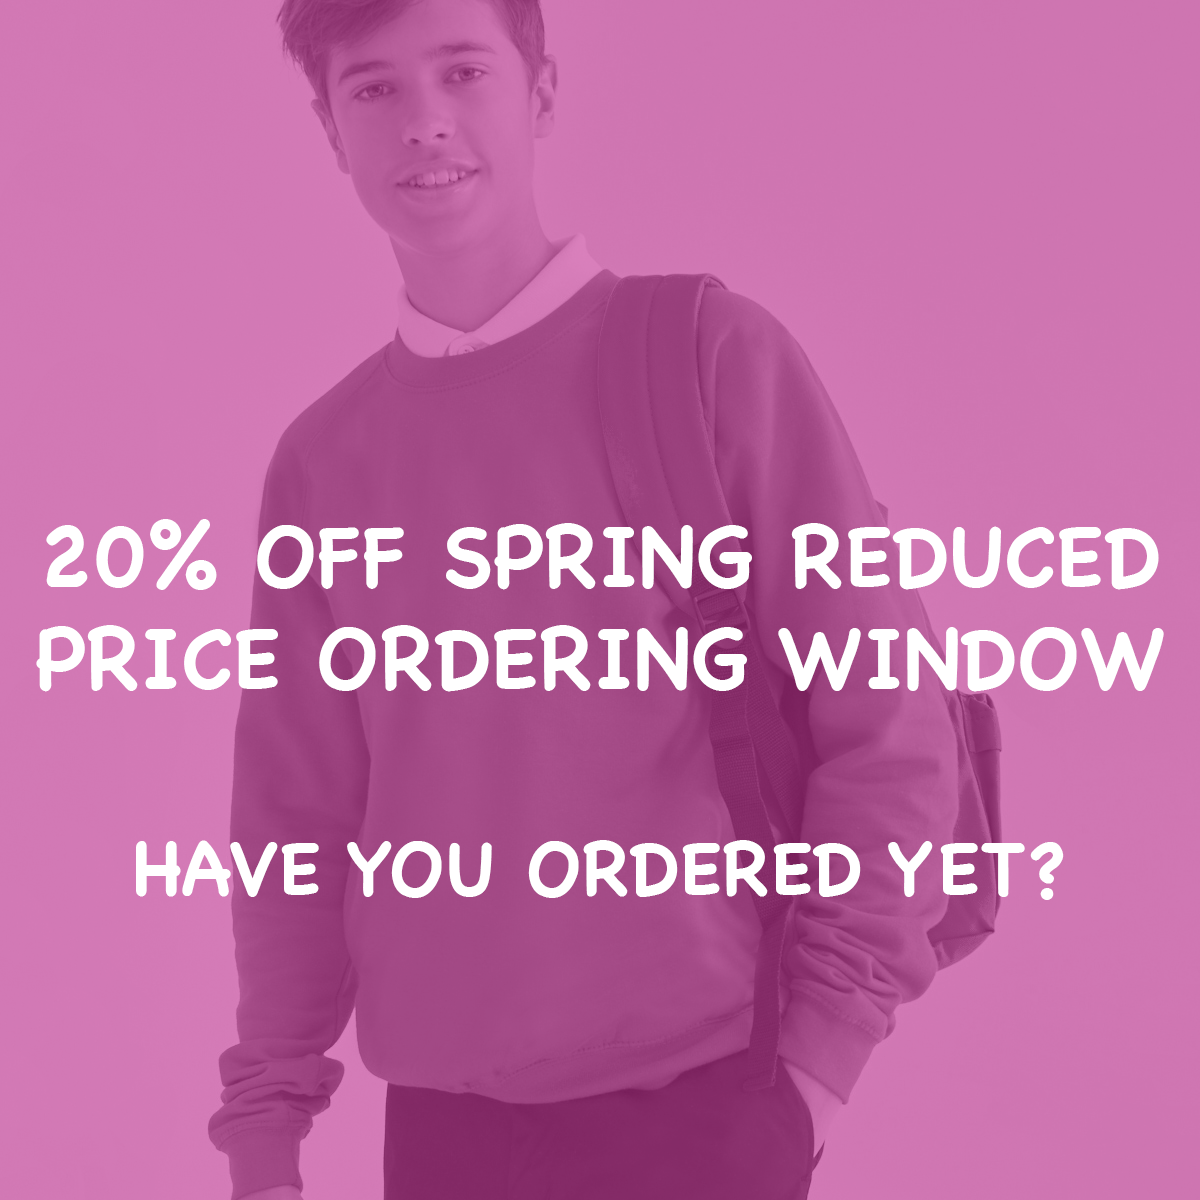 Spring Reduced Price Ordering Window